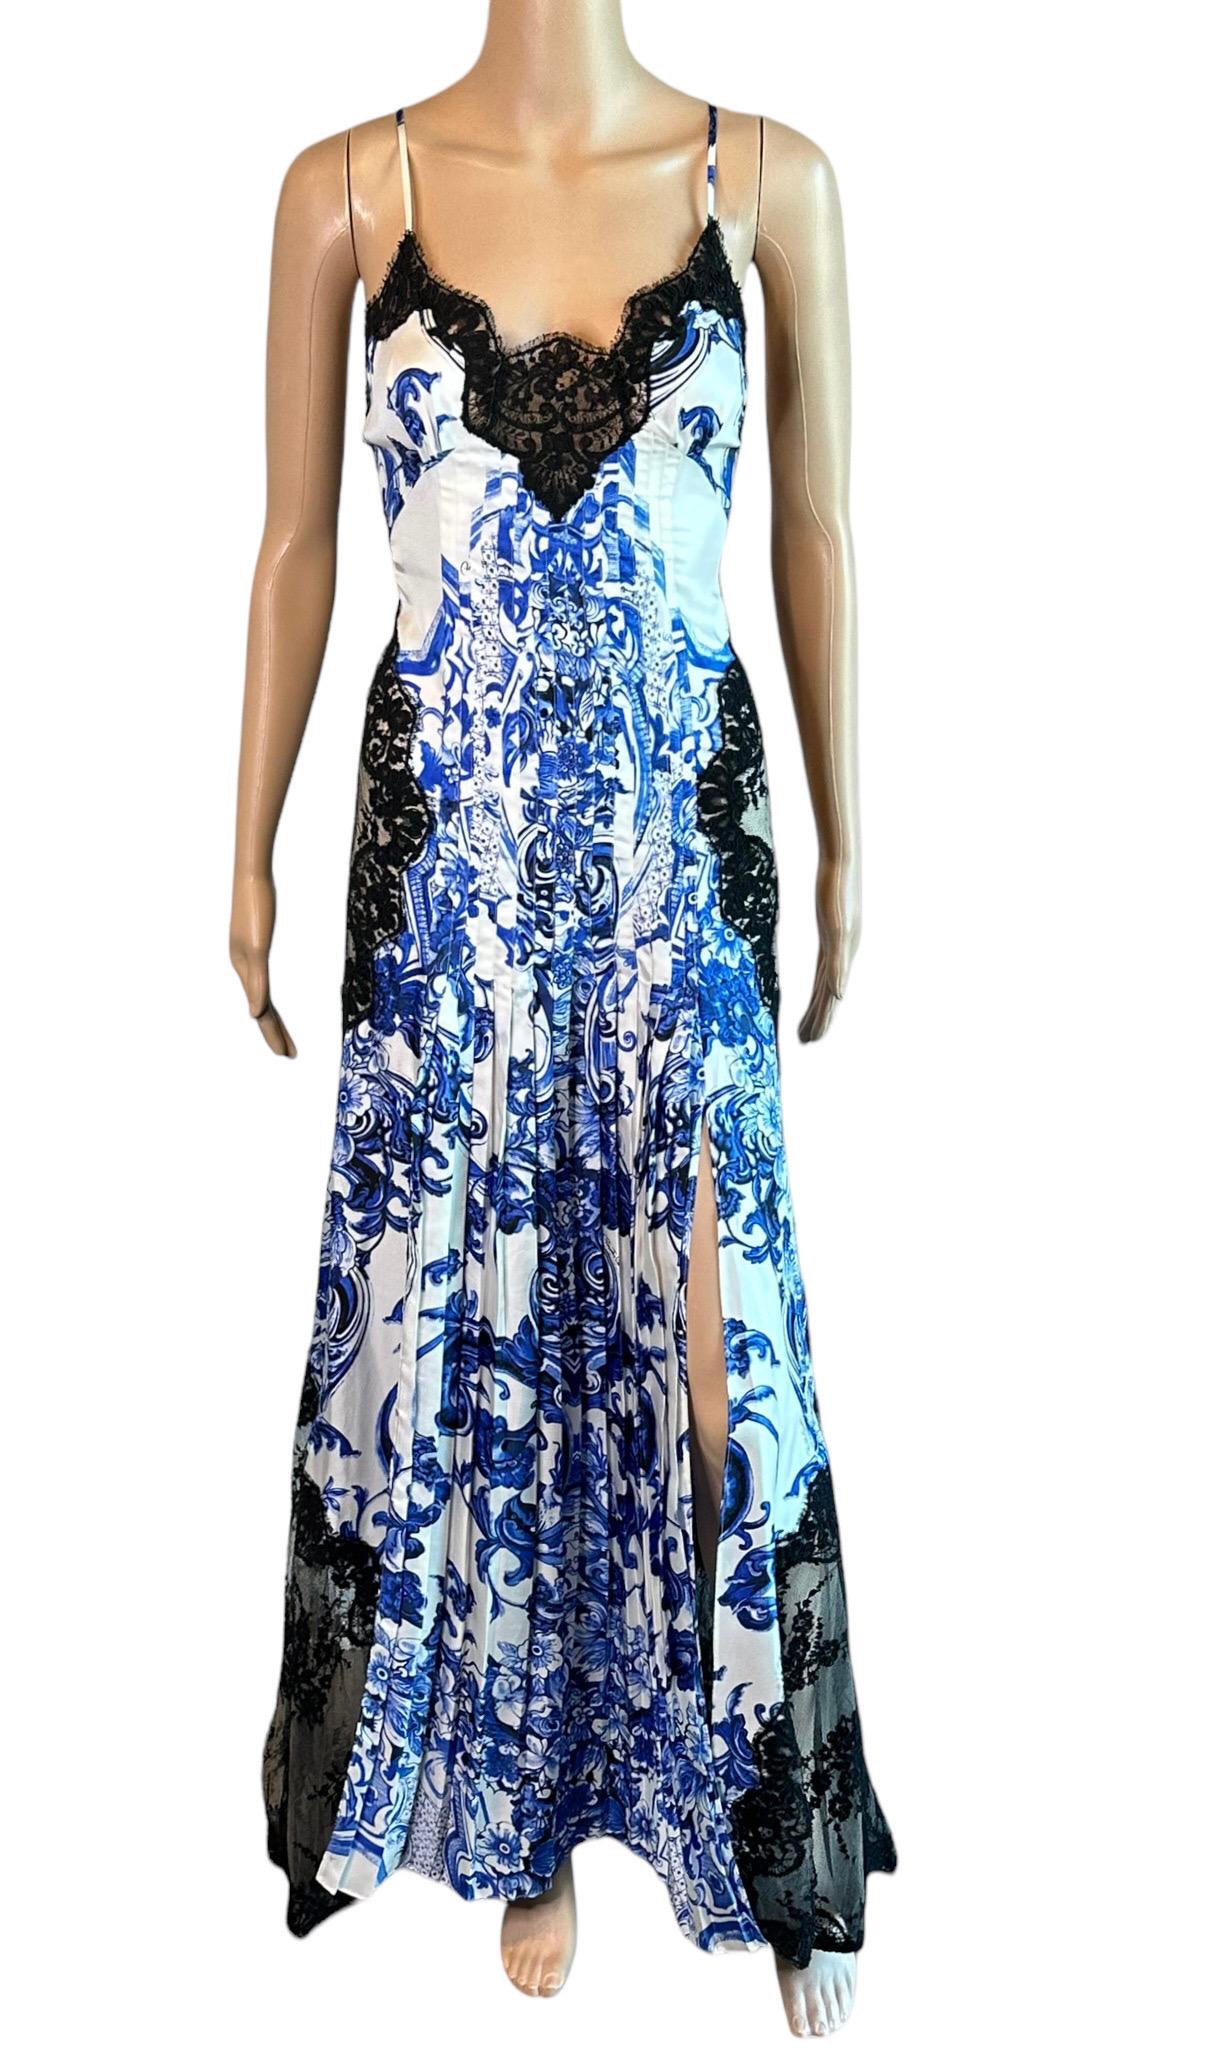 Roberto Cavalli Resort 2013 Chinoiserie Ming Porcelain Sheer Lace Evening Dress For Sale 5